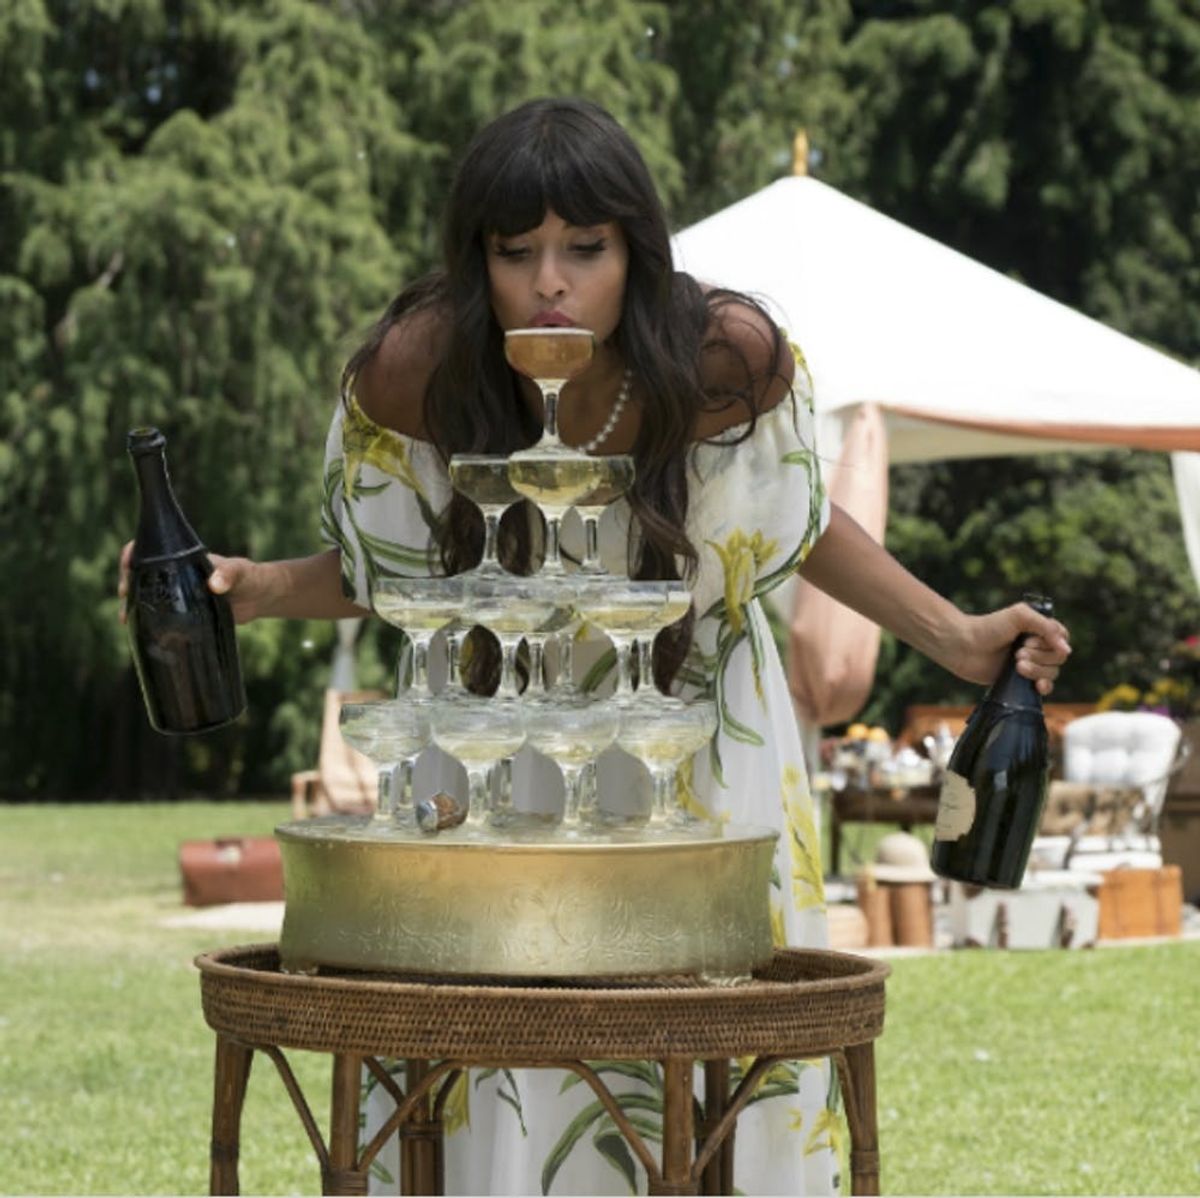 Why ‘The Good Place’ Star Jameela Jamil Wants Us to Stop Talking About ‘Body Positivity’